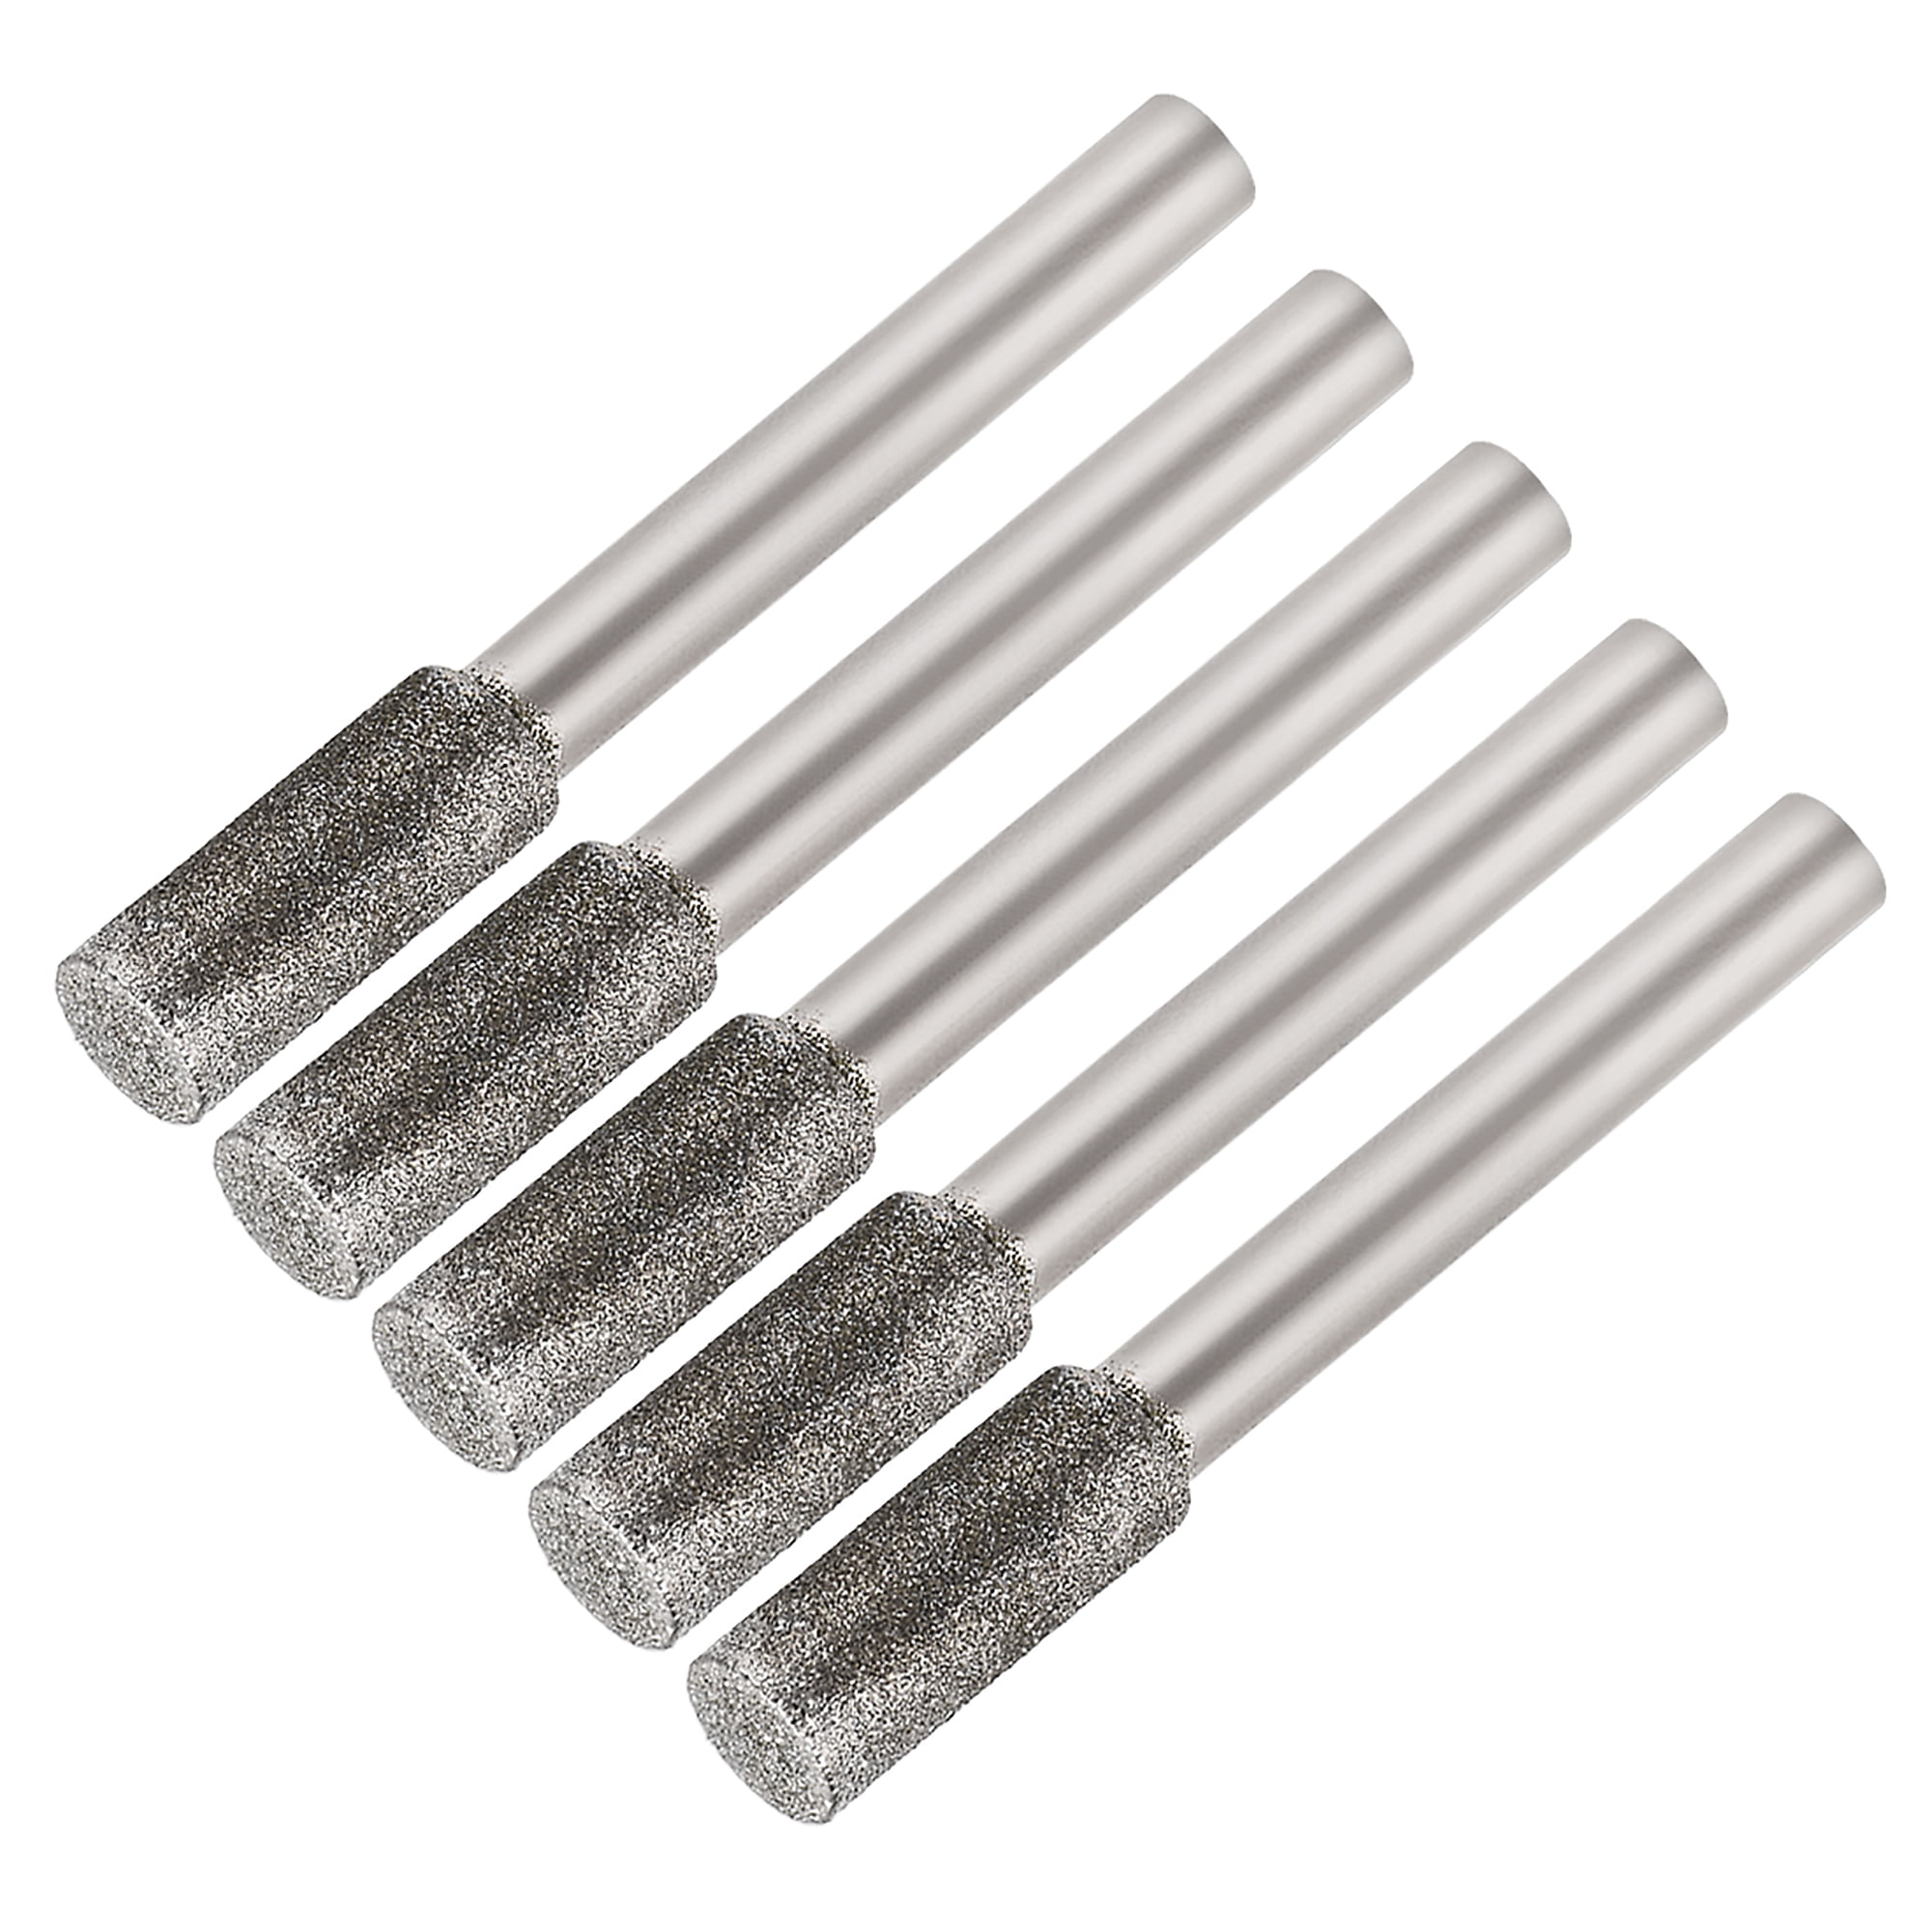 Diamond Burrs Grinding Drill Bits for Rotary Tool 1/4-Inch Shank 8mm ...